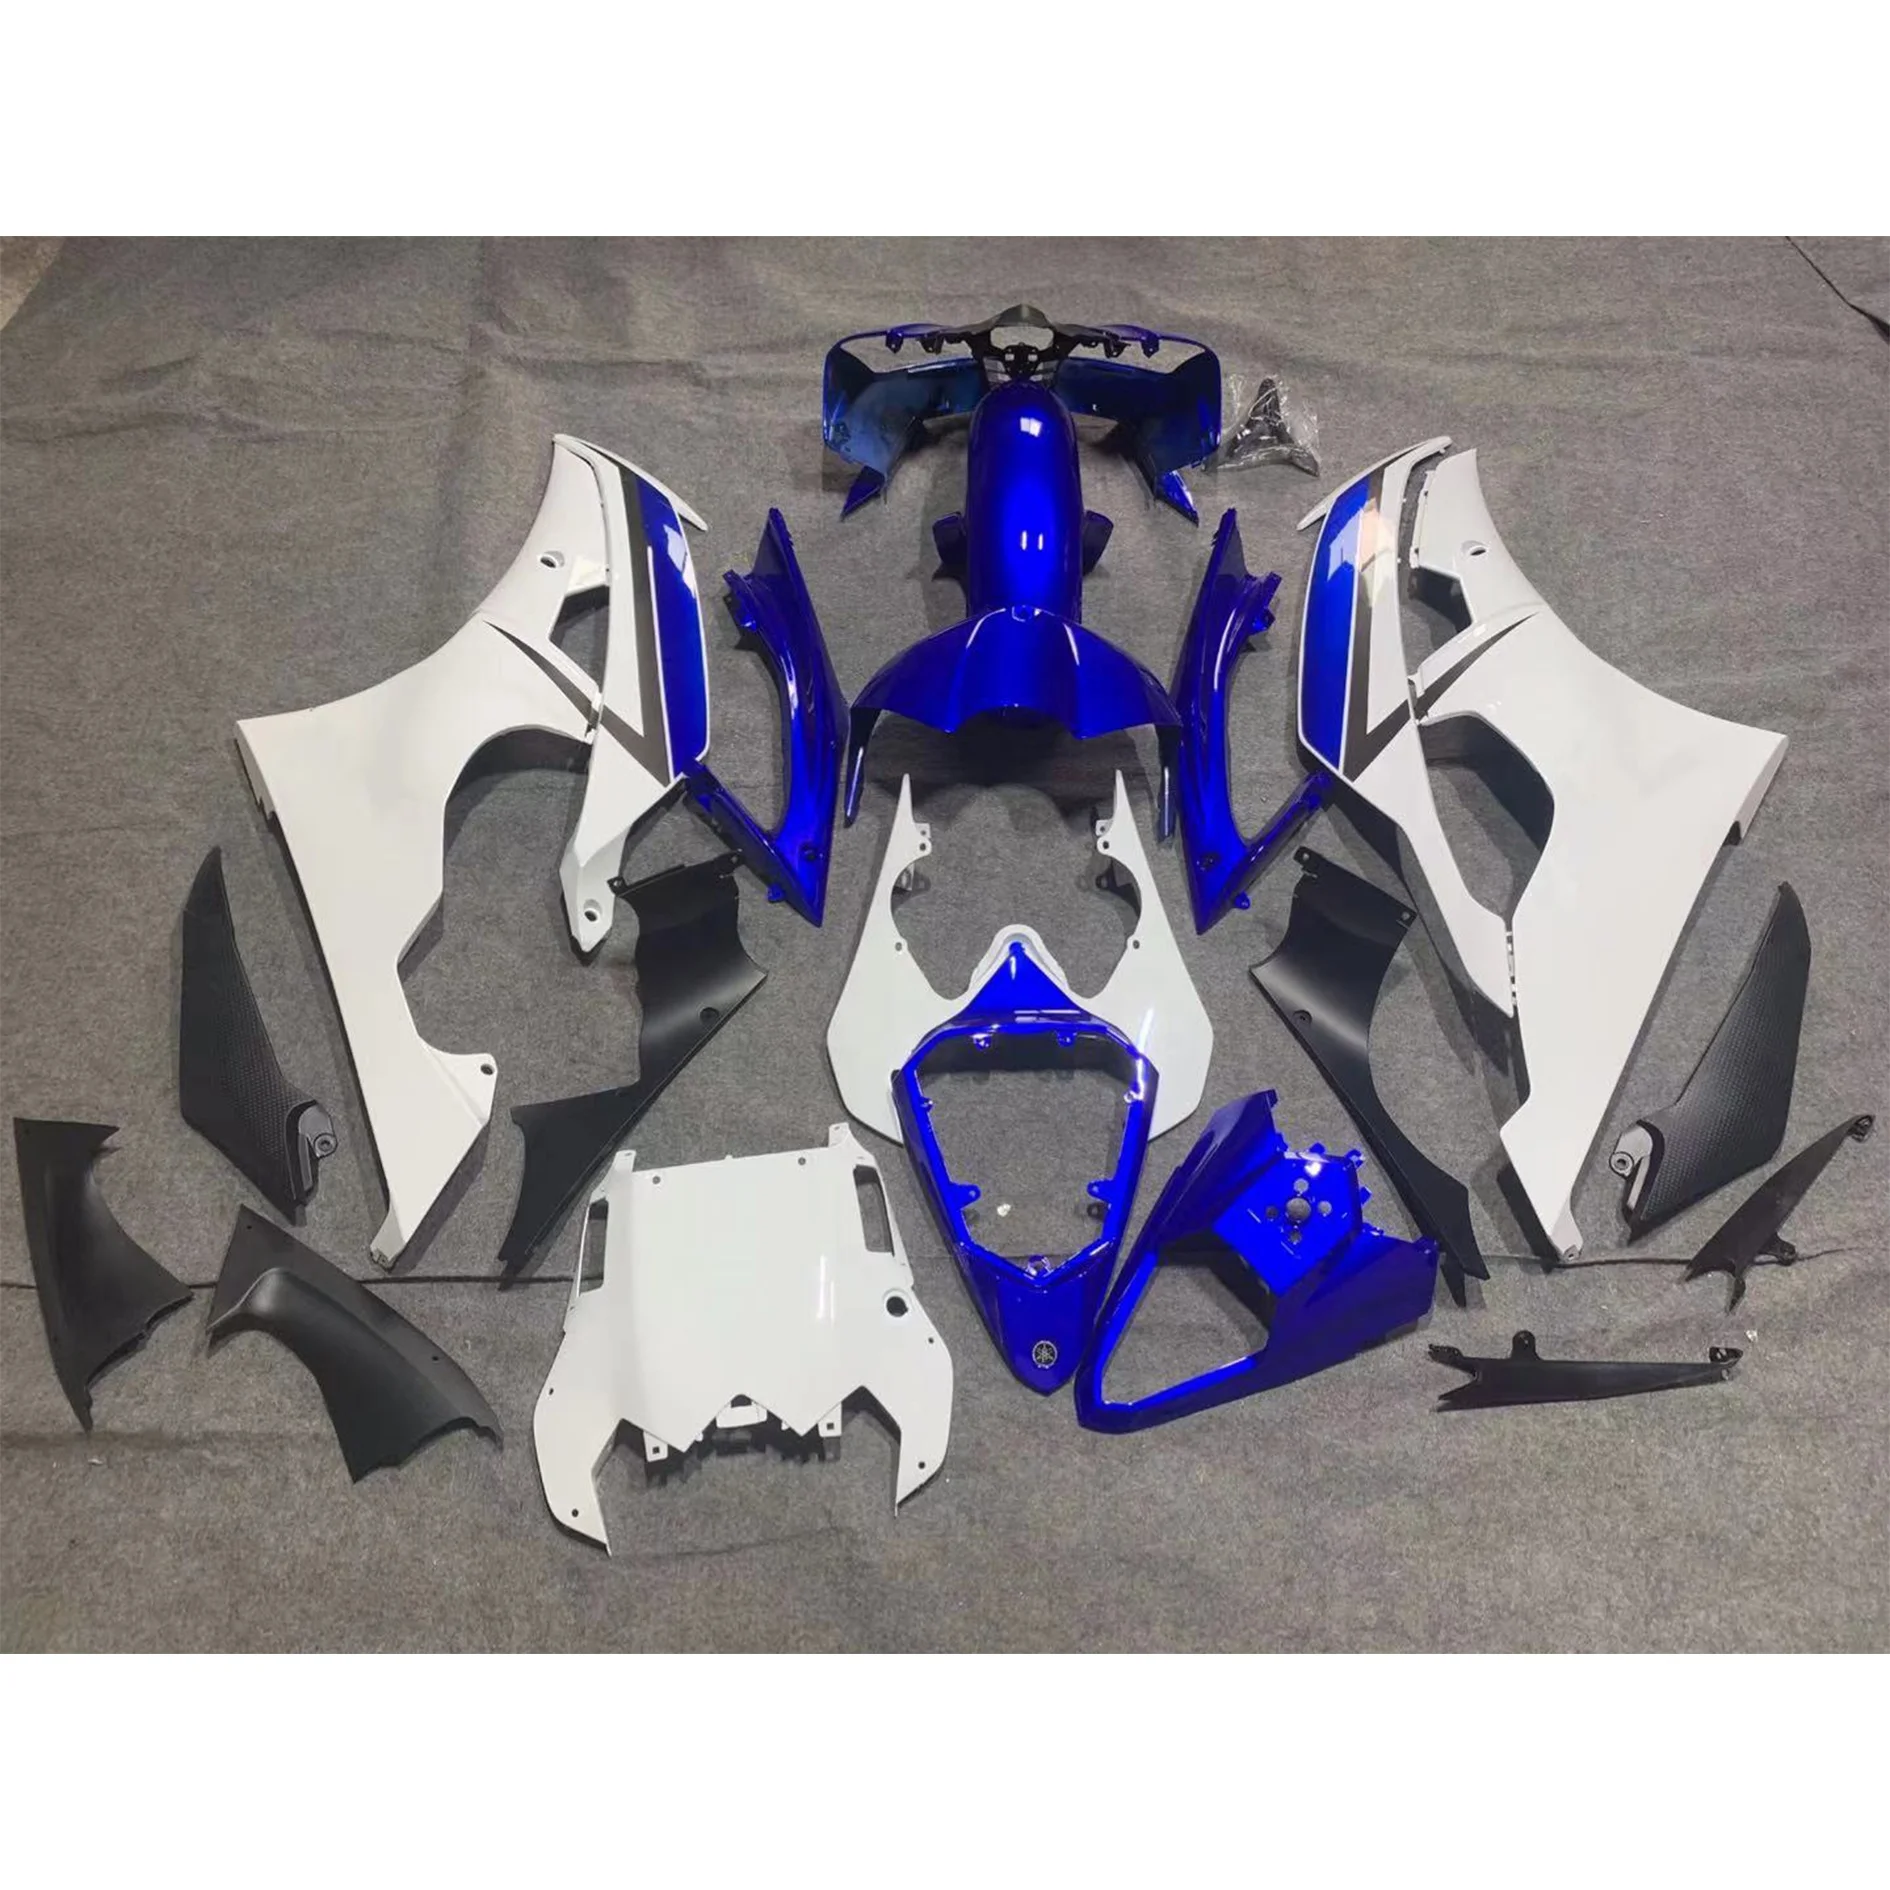 

2021 WHSC Blue And White Motorcycle Accessories For YAMAHA R6 2008-2015 Custom Cover Body ABS Plastic Fairings Kit, Pictures shown